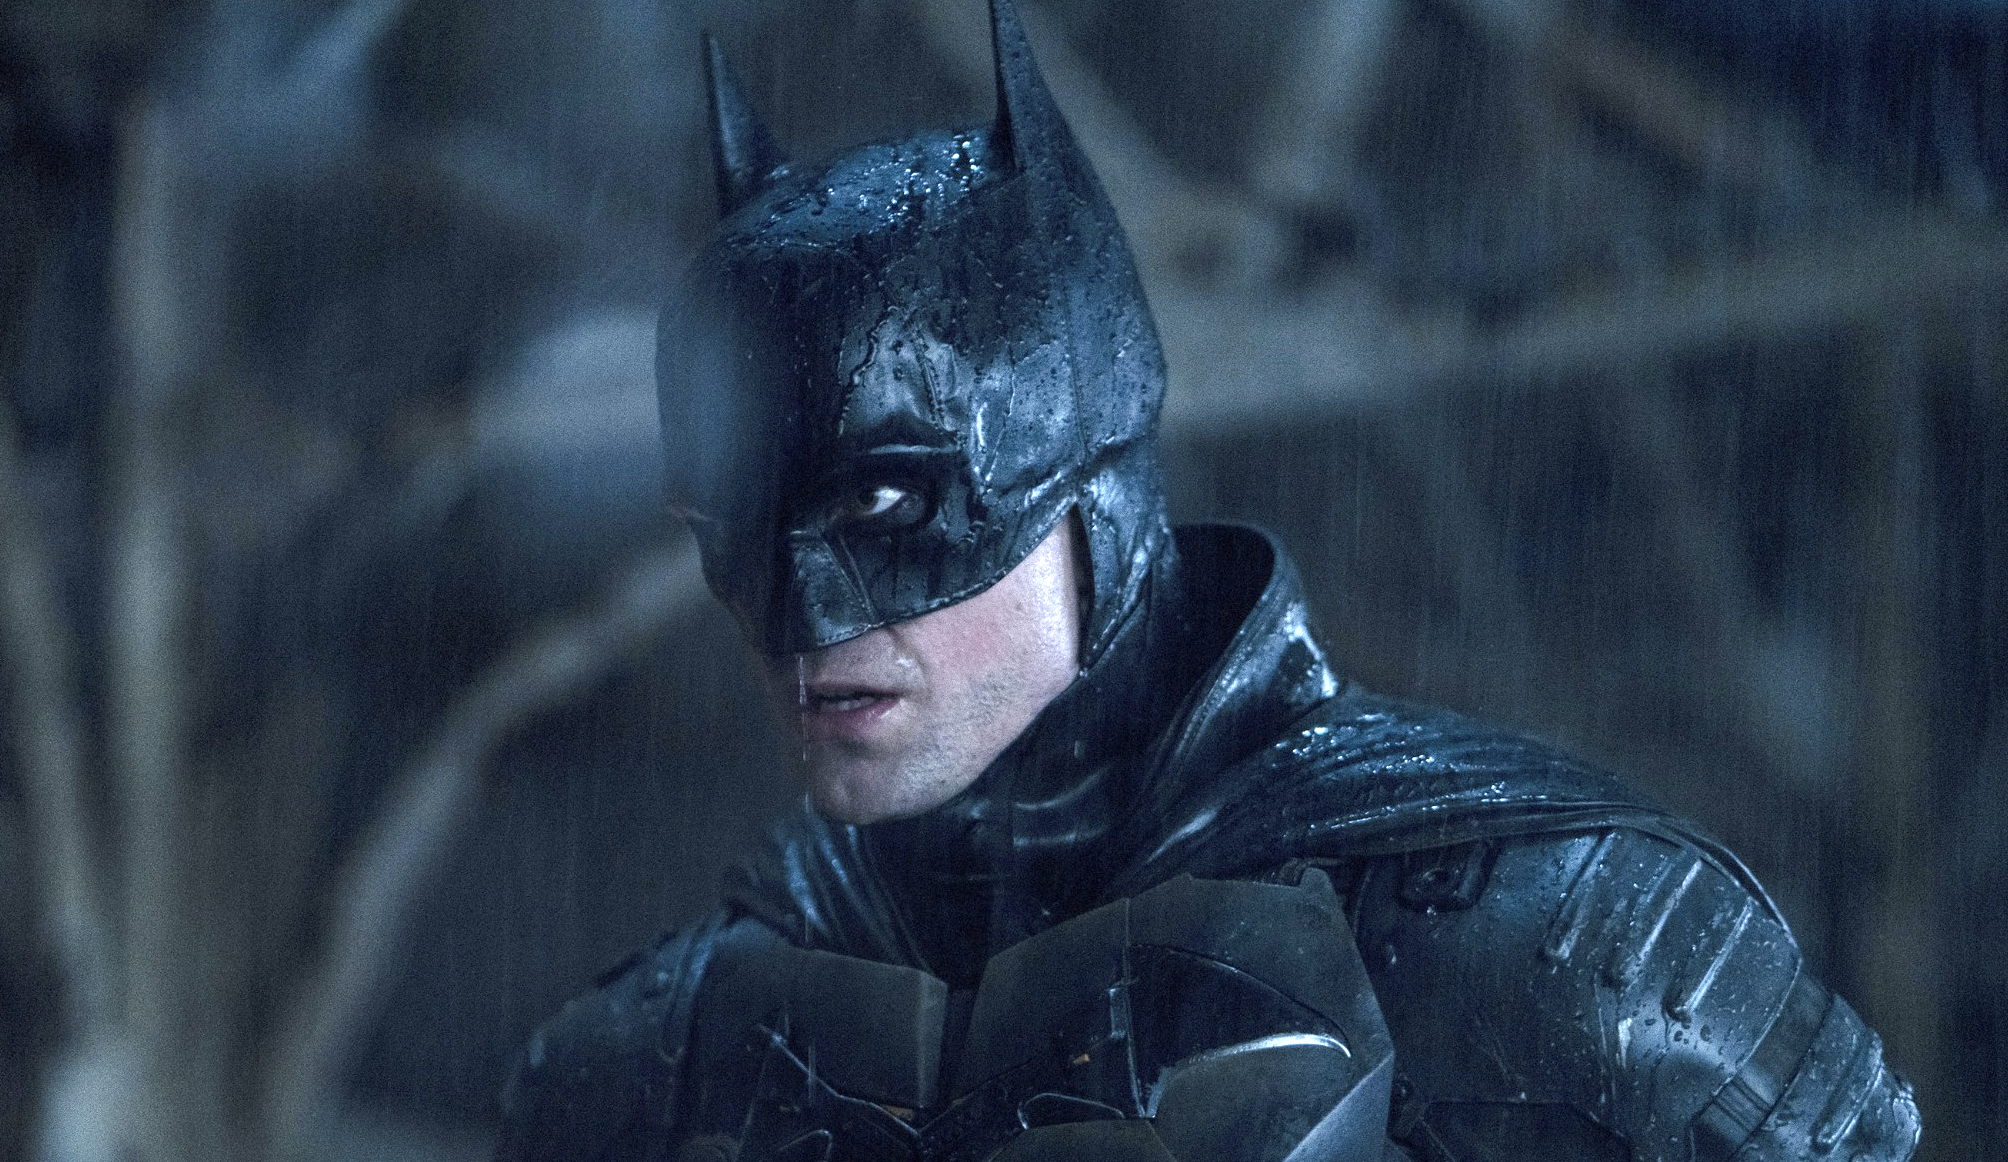 The Batman Streaming Details - Where to Watch the 2022 Movie